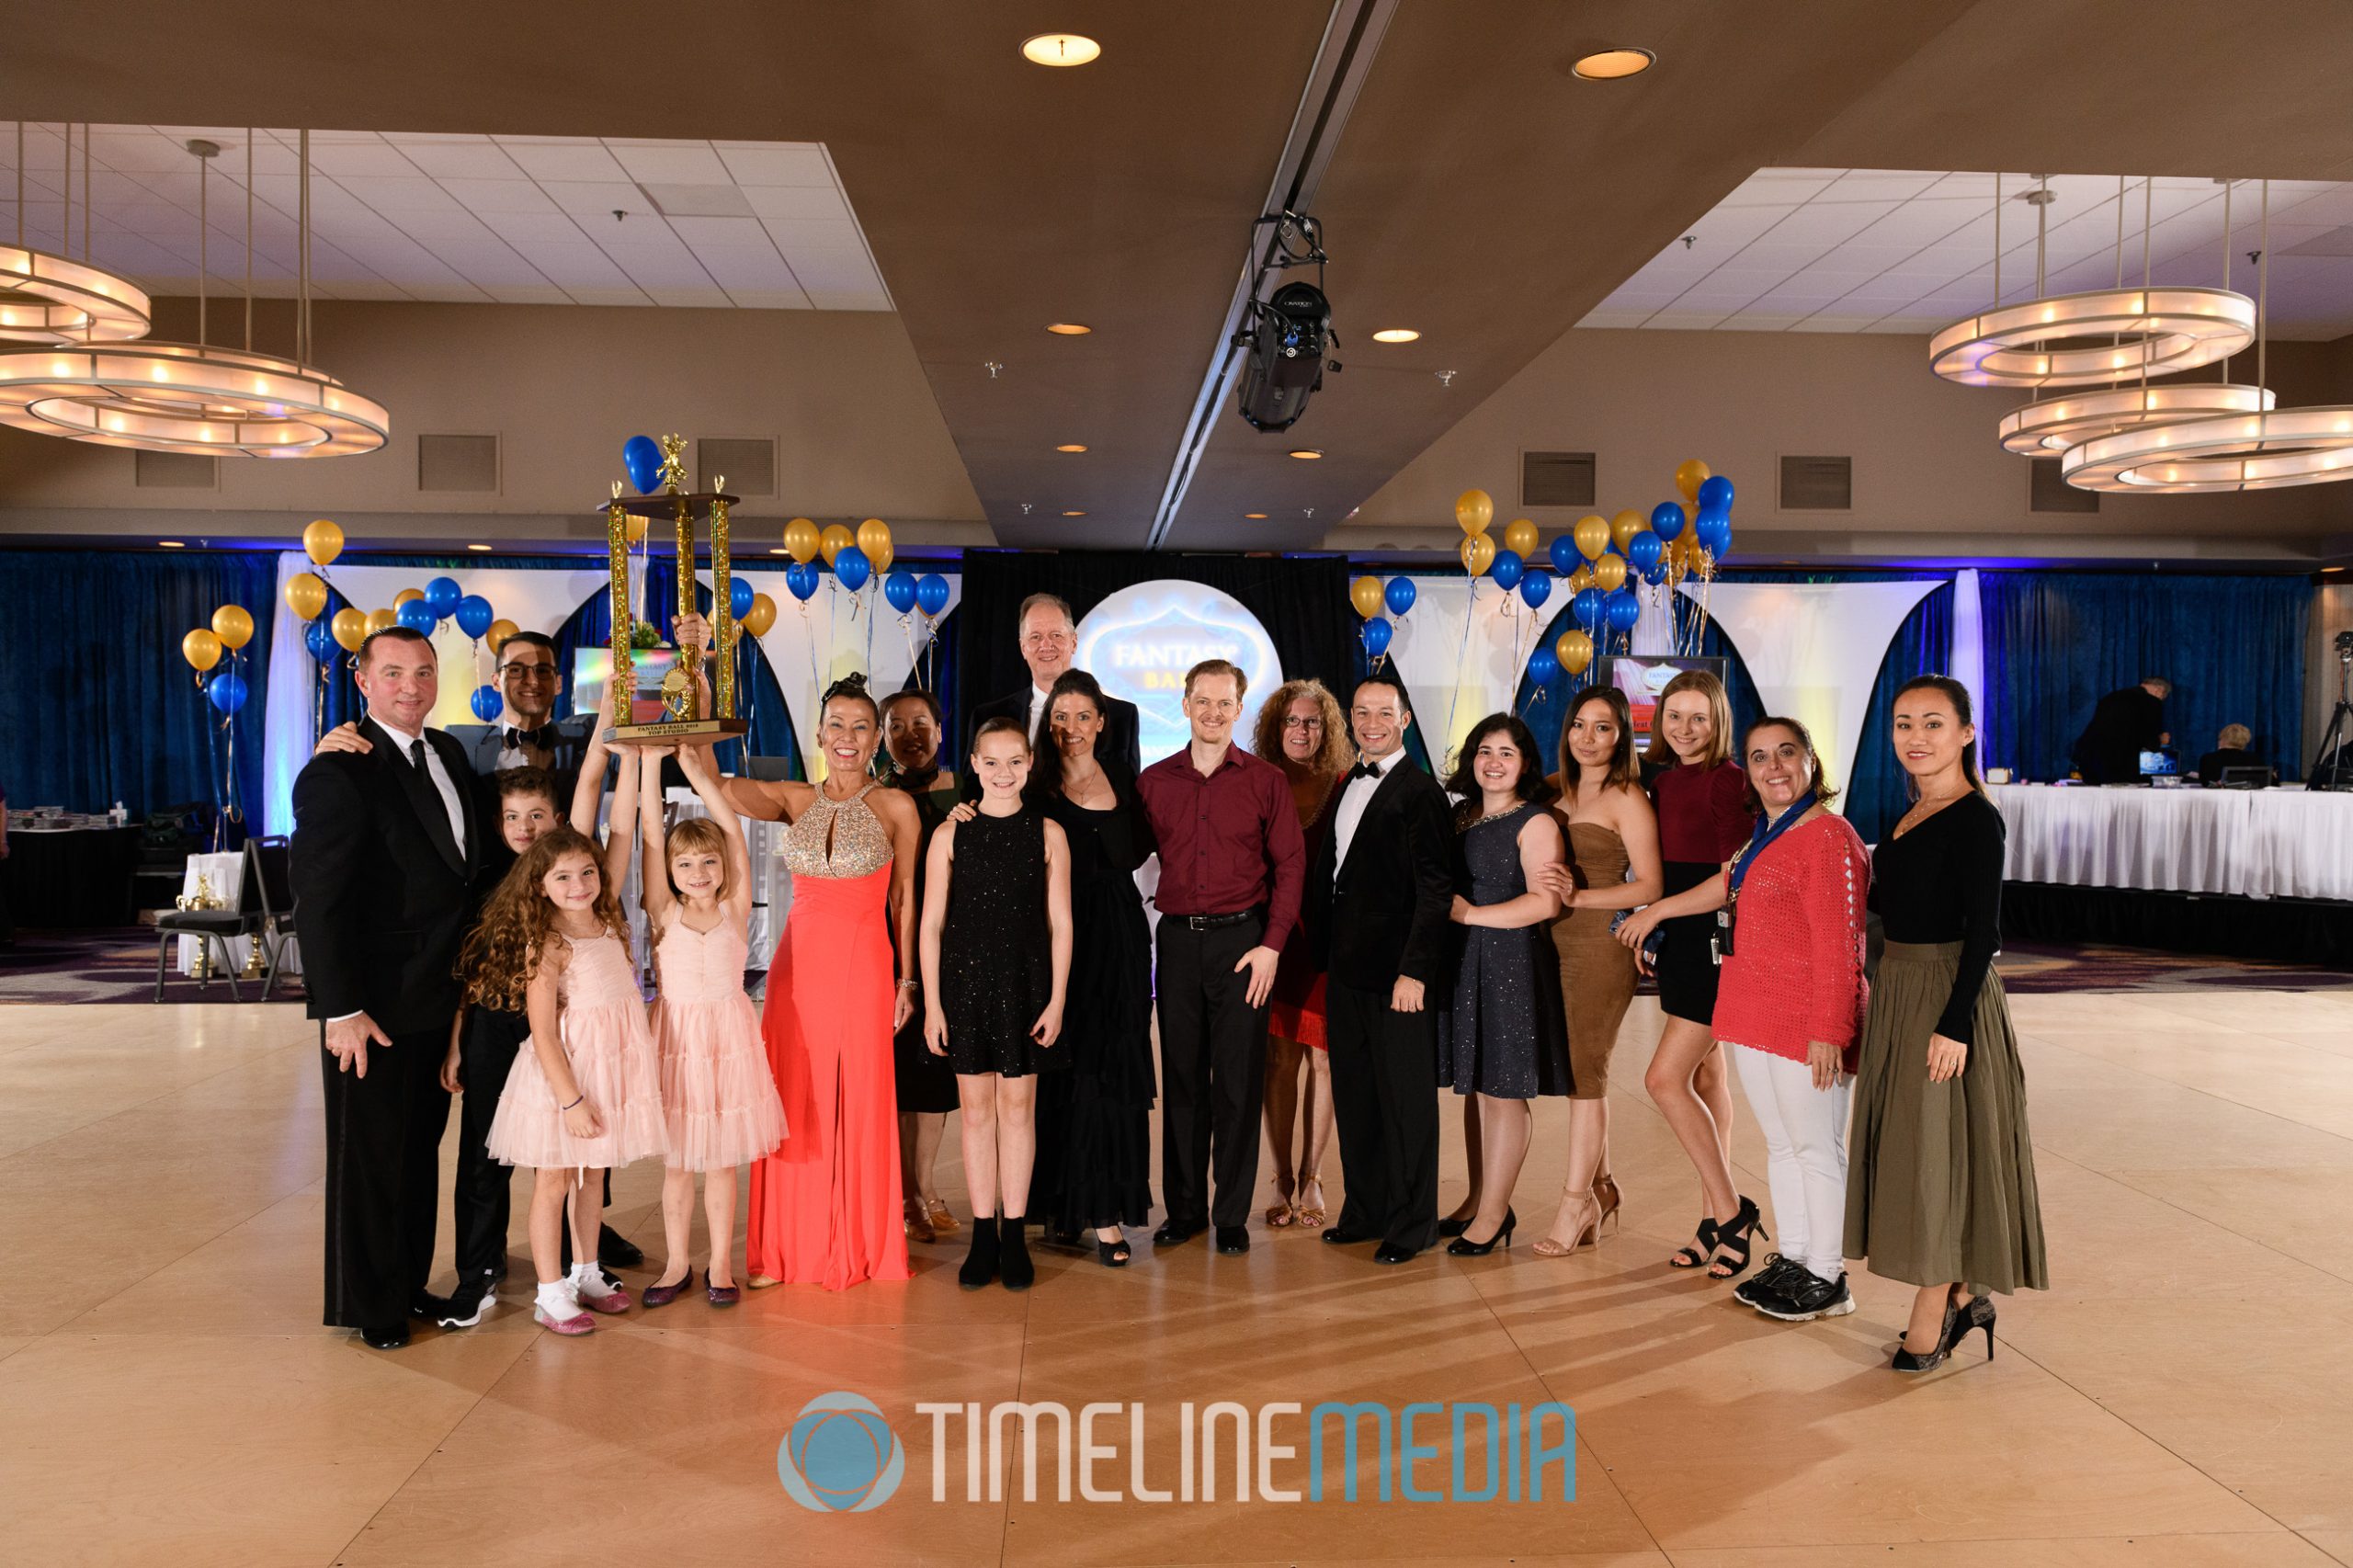 Top Studio at the Fantasy Ball Dancesport Competition ©TimeLine Media